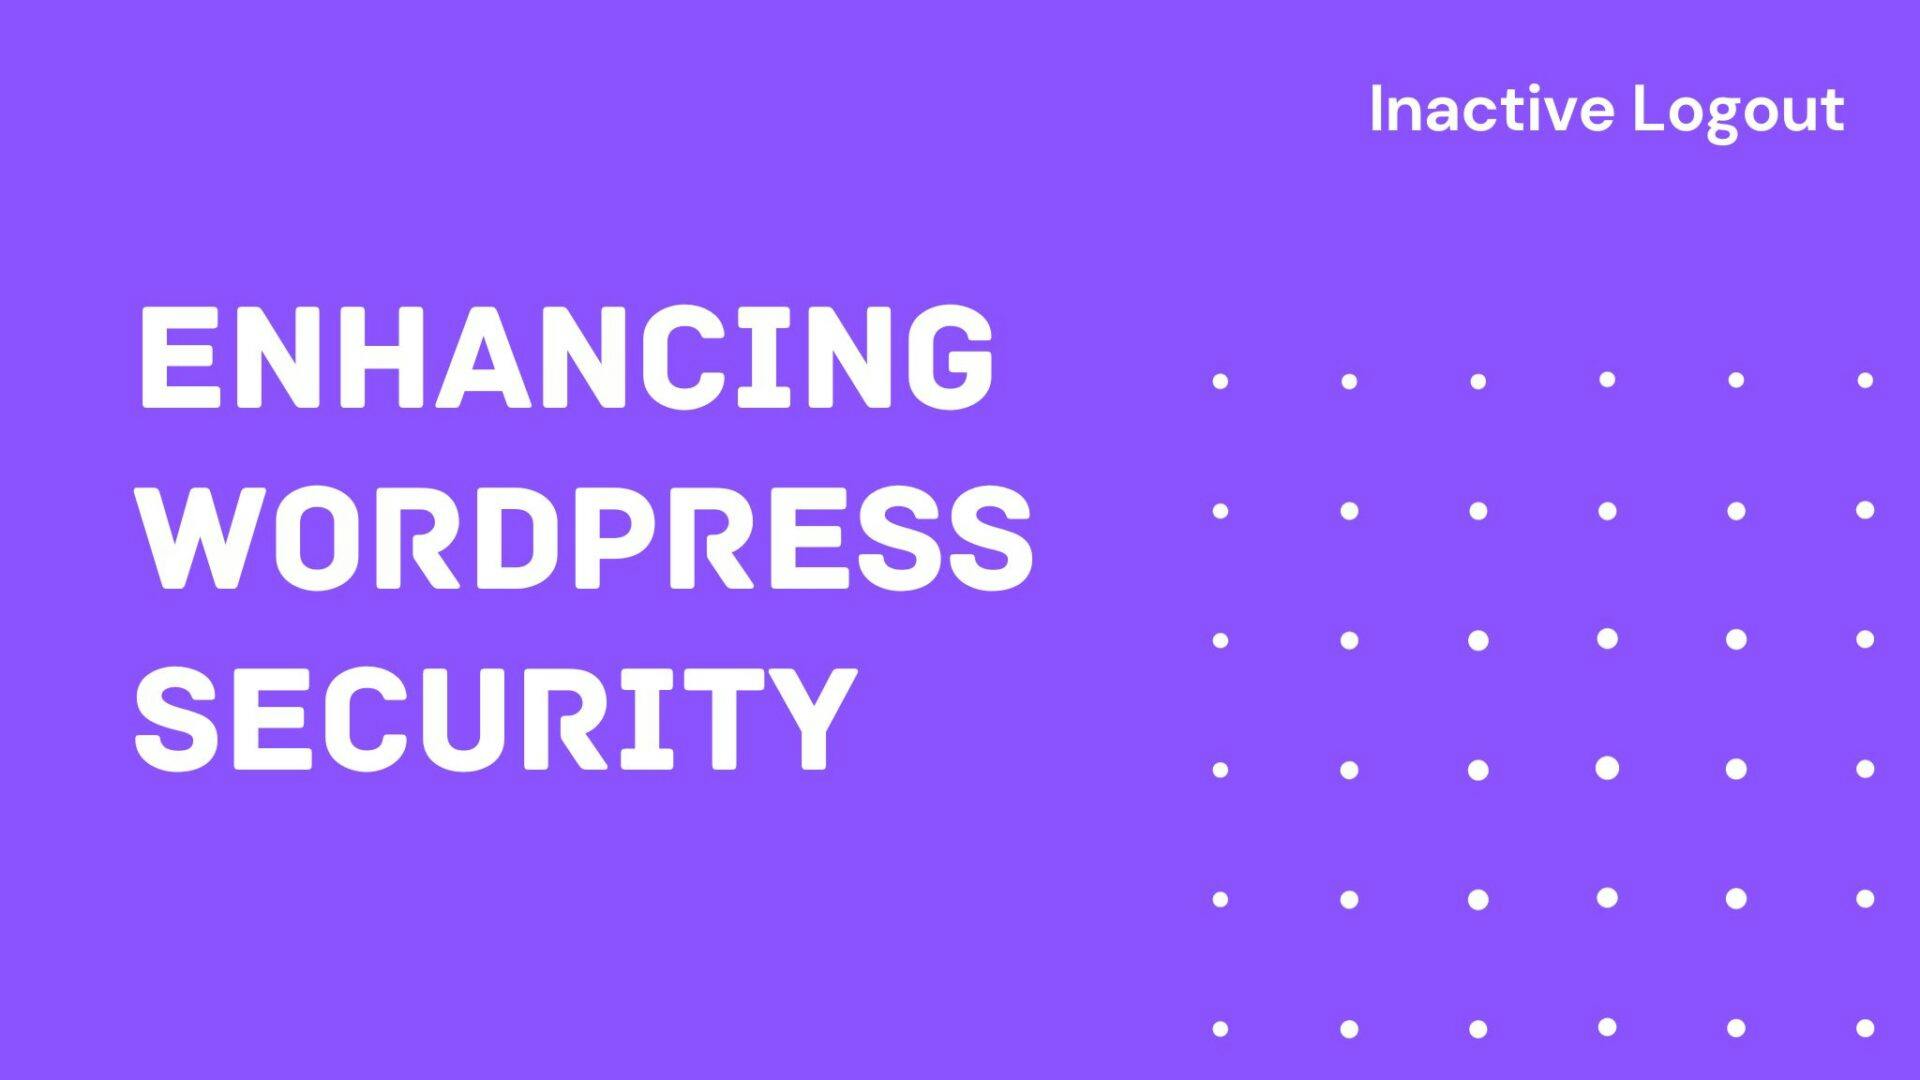 Enhancing WordPress Security with the Inactive Logout Plugin